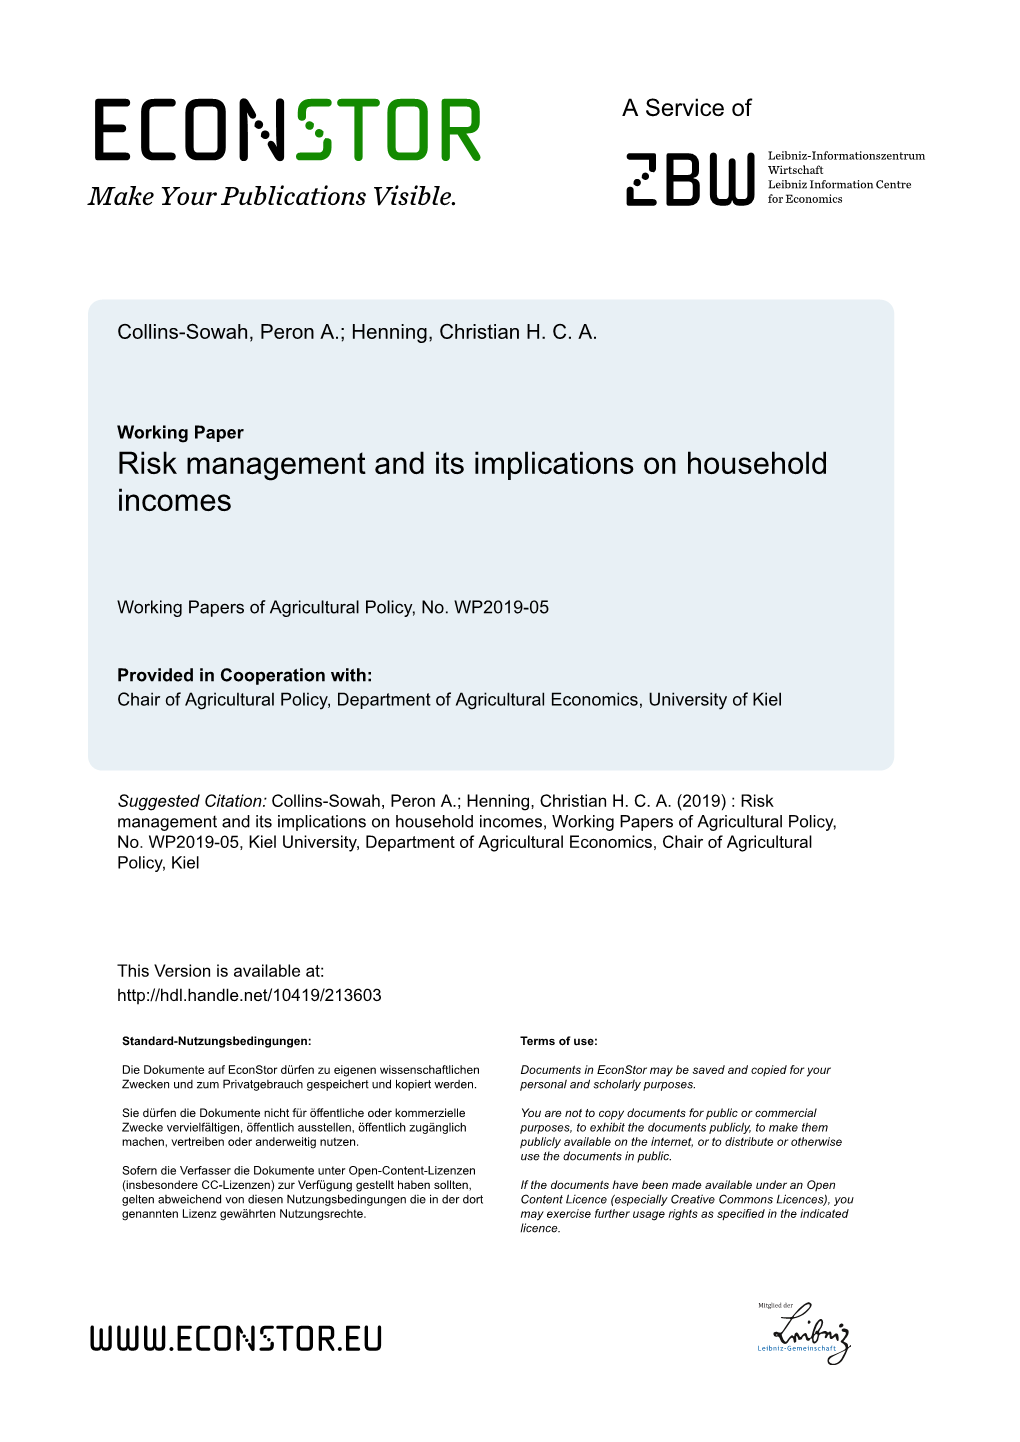 Risk Management and Its Implications on Household Incomes